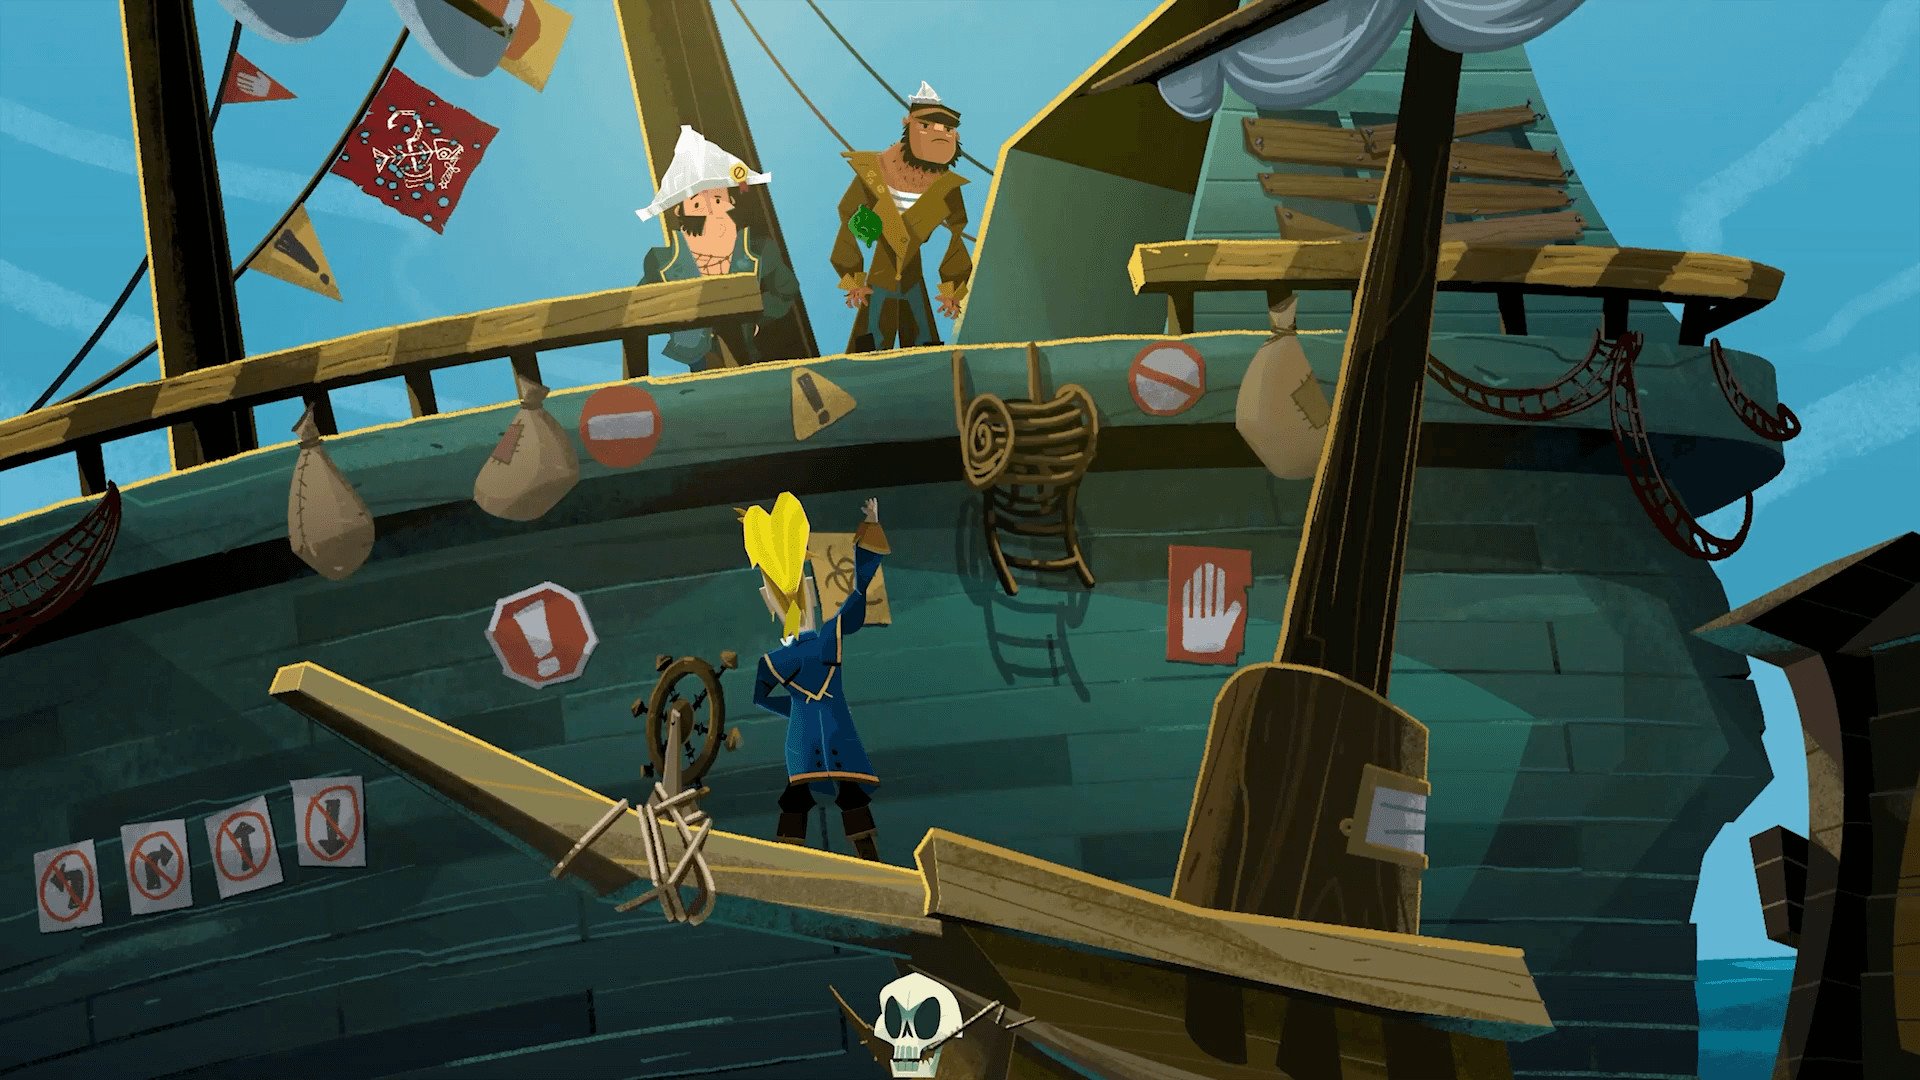 Monkey Island 3: There is no new information from the boss because of toxic fans